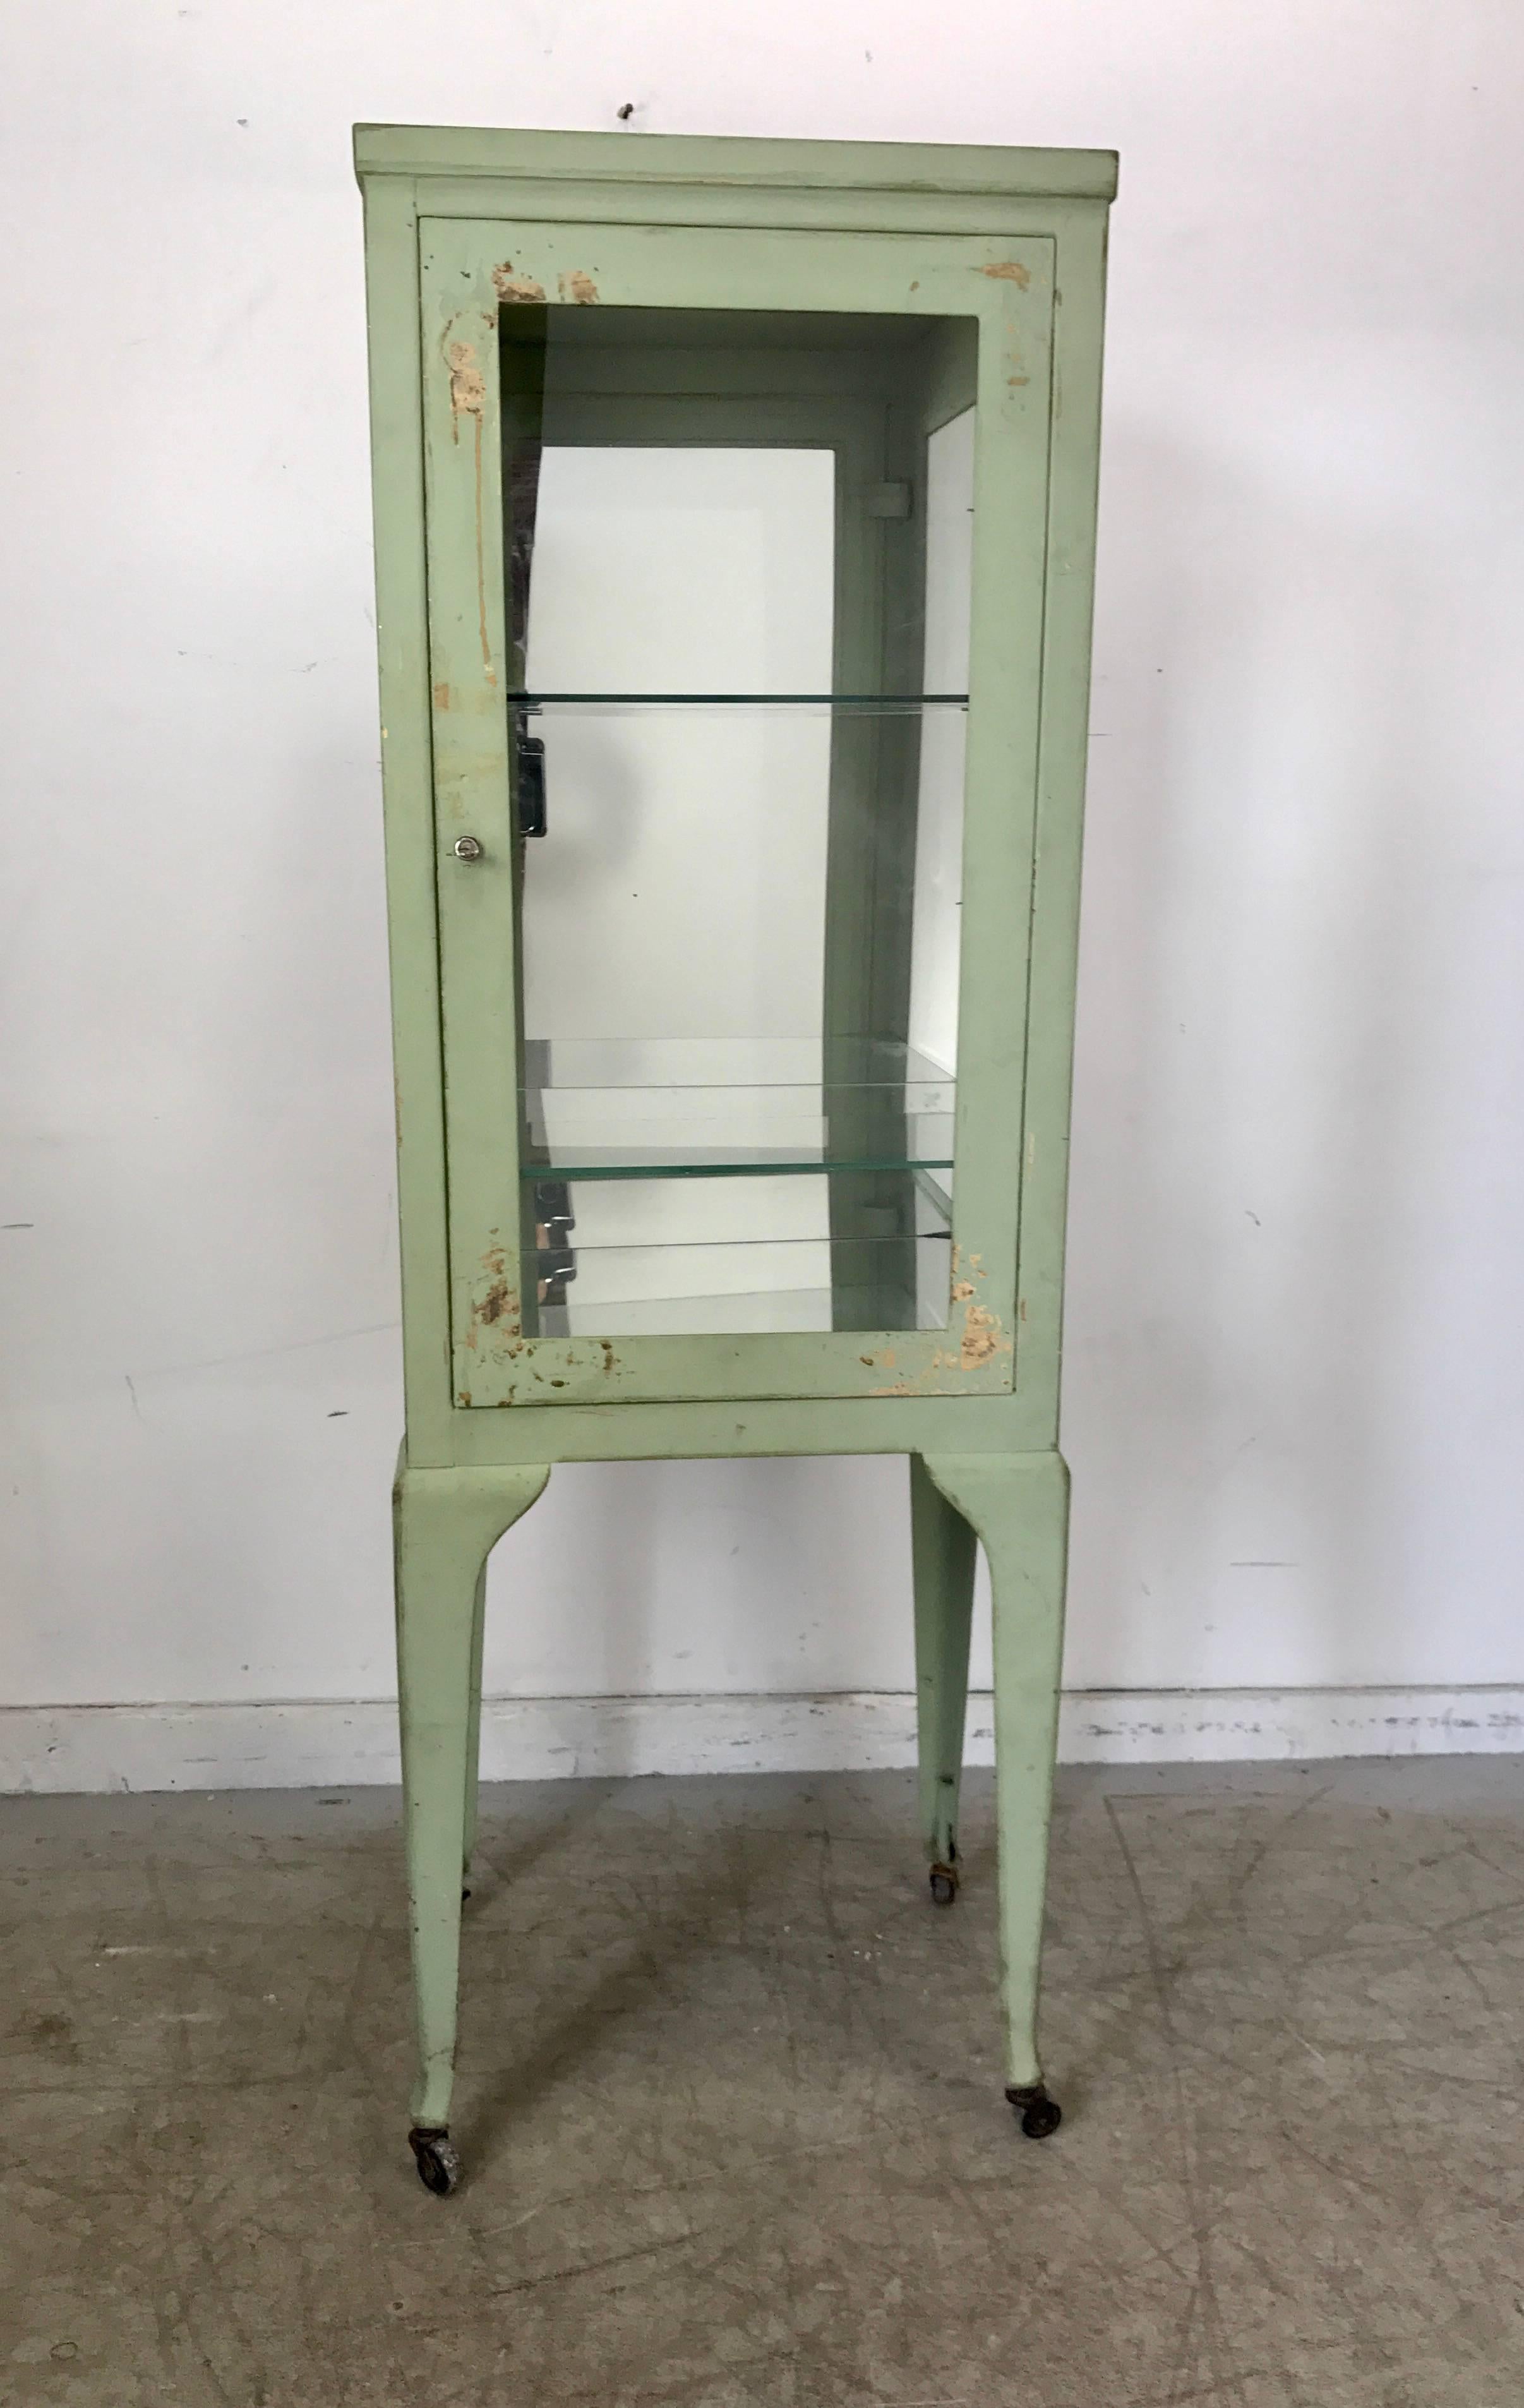 Classic 1920s metal and glass specimen cabinet, medical, Industrial. Wonderful patina color, surface and proportion, retains original locking mechanism and key, hand delivery avail to New York city or anywhere en route from Buffalo New York.